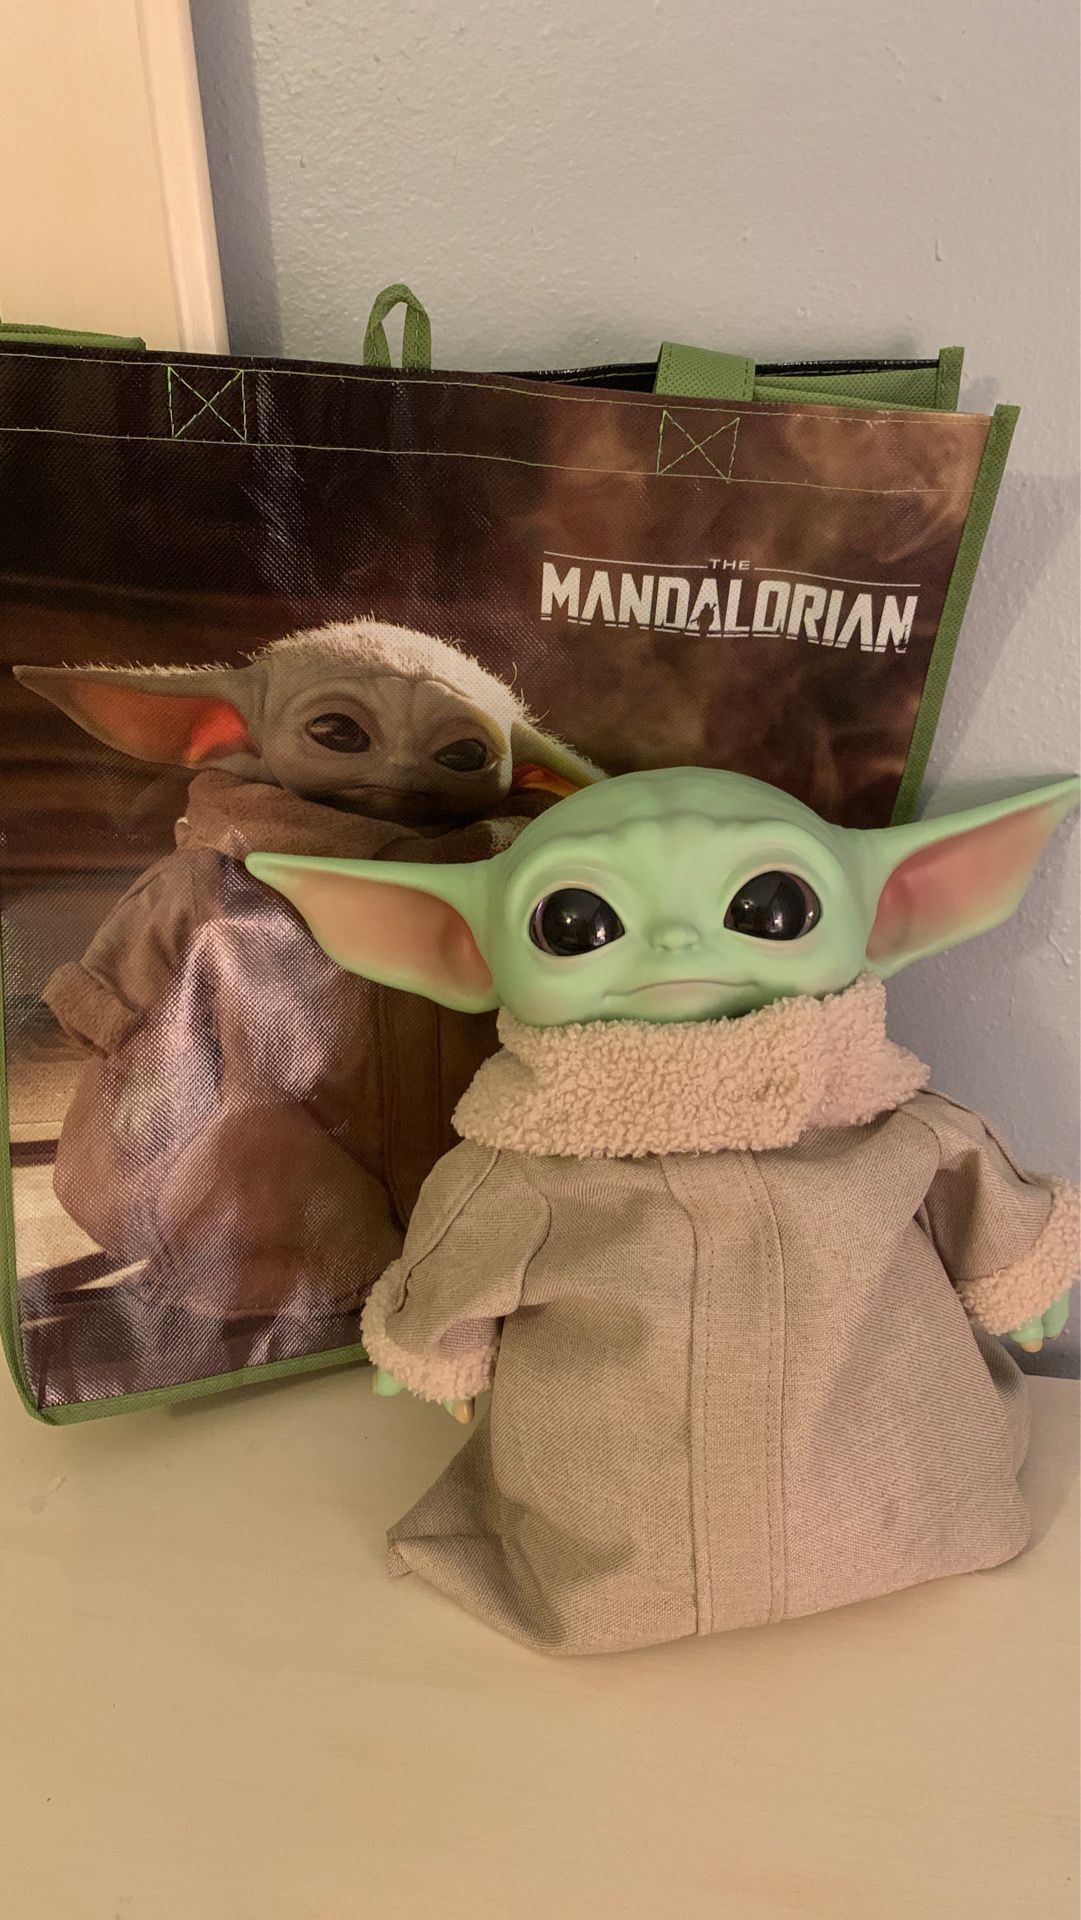 Star Wars The Child Plush Toy, 11-Inch Small Yoda-Like Soft Figure From The Mandalorian